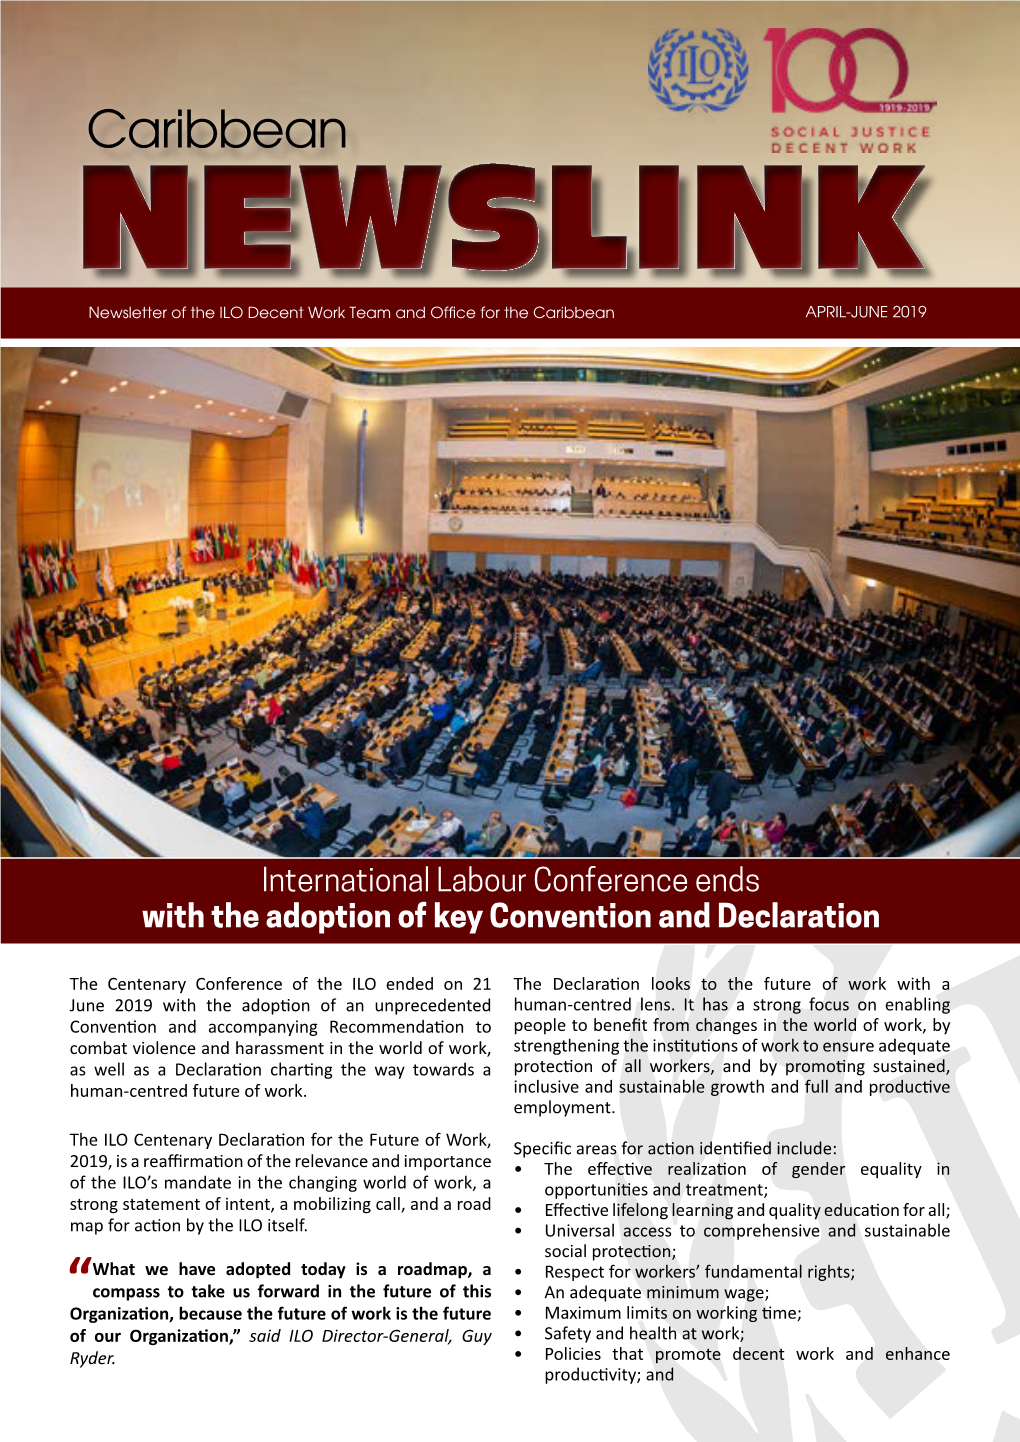 Caribbean NEWSLINK Newsletter of the ILO Decent Work Team and Office for the Caribbean APRIL-JUNE 2019